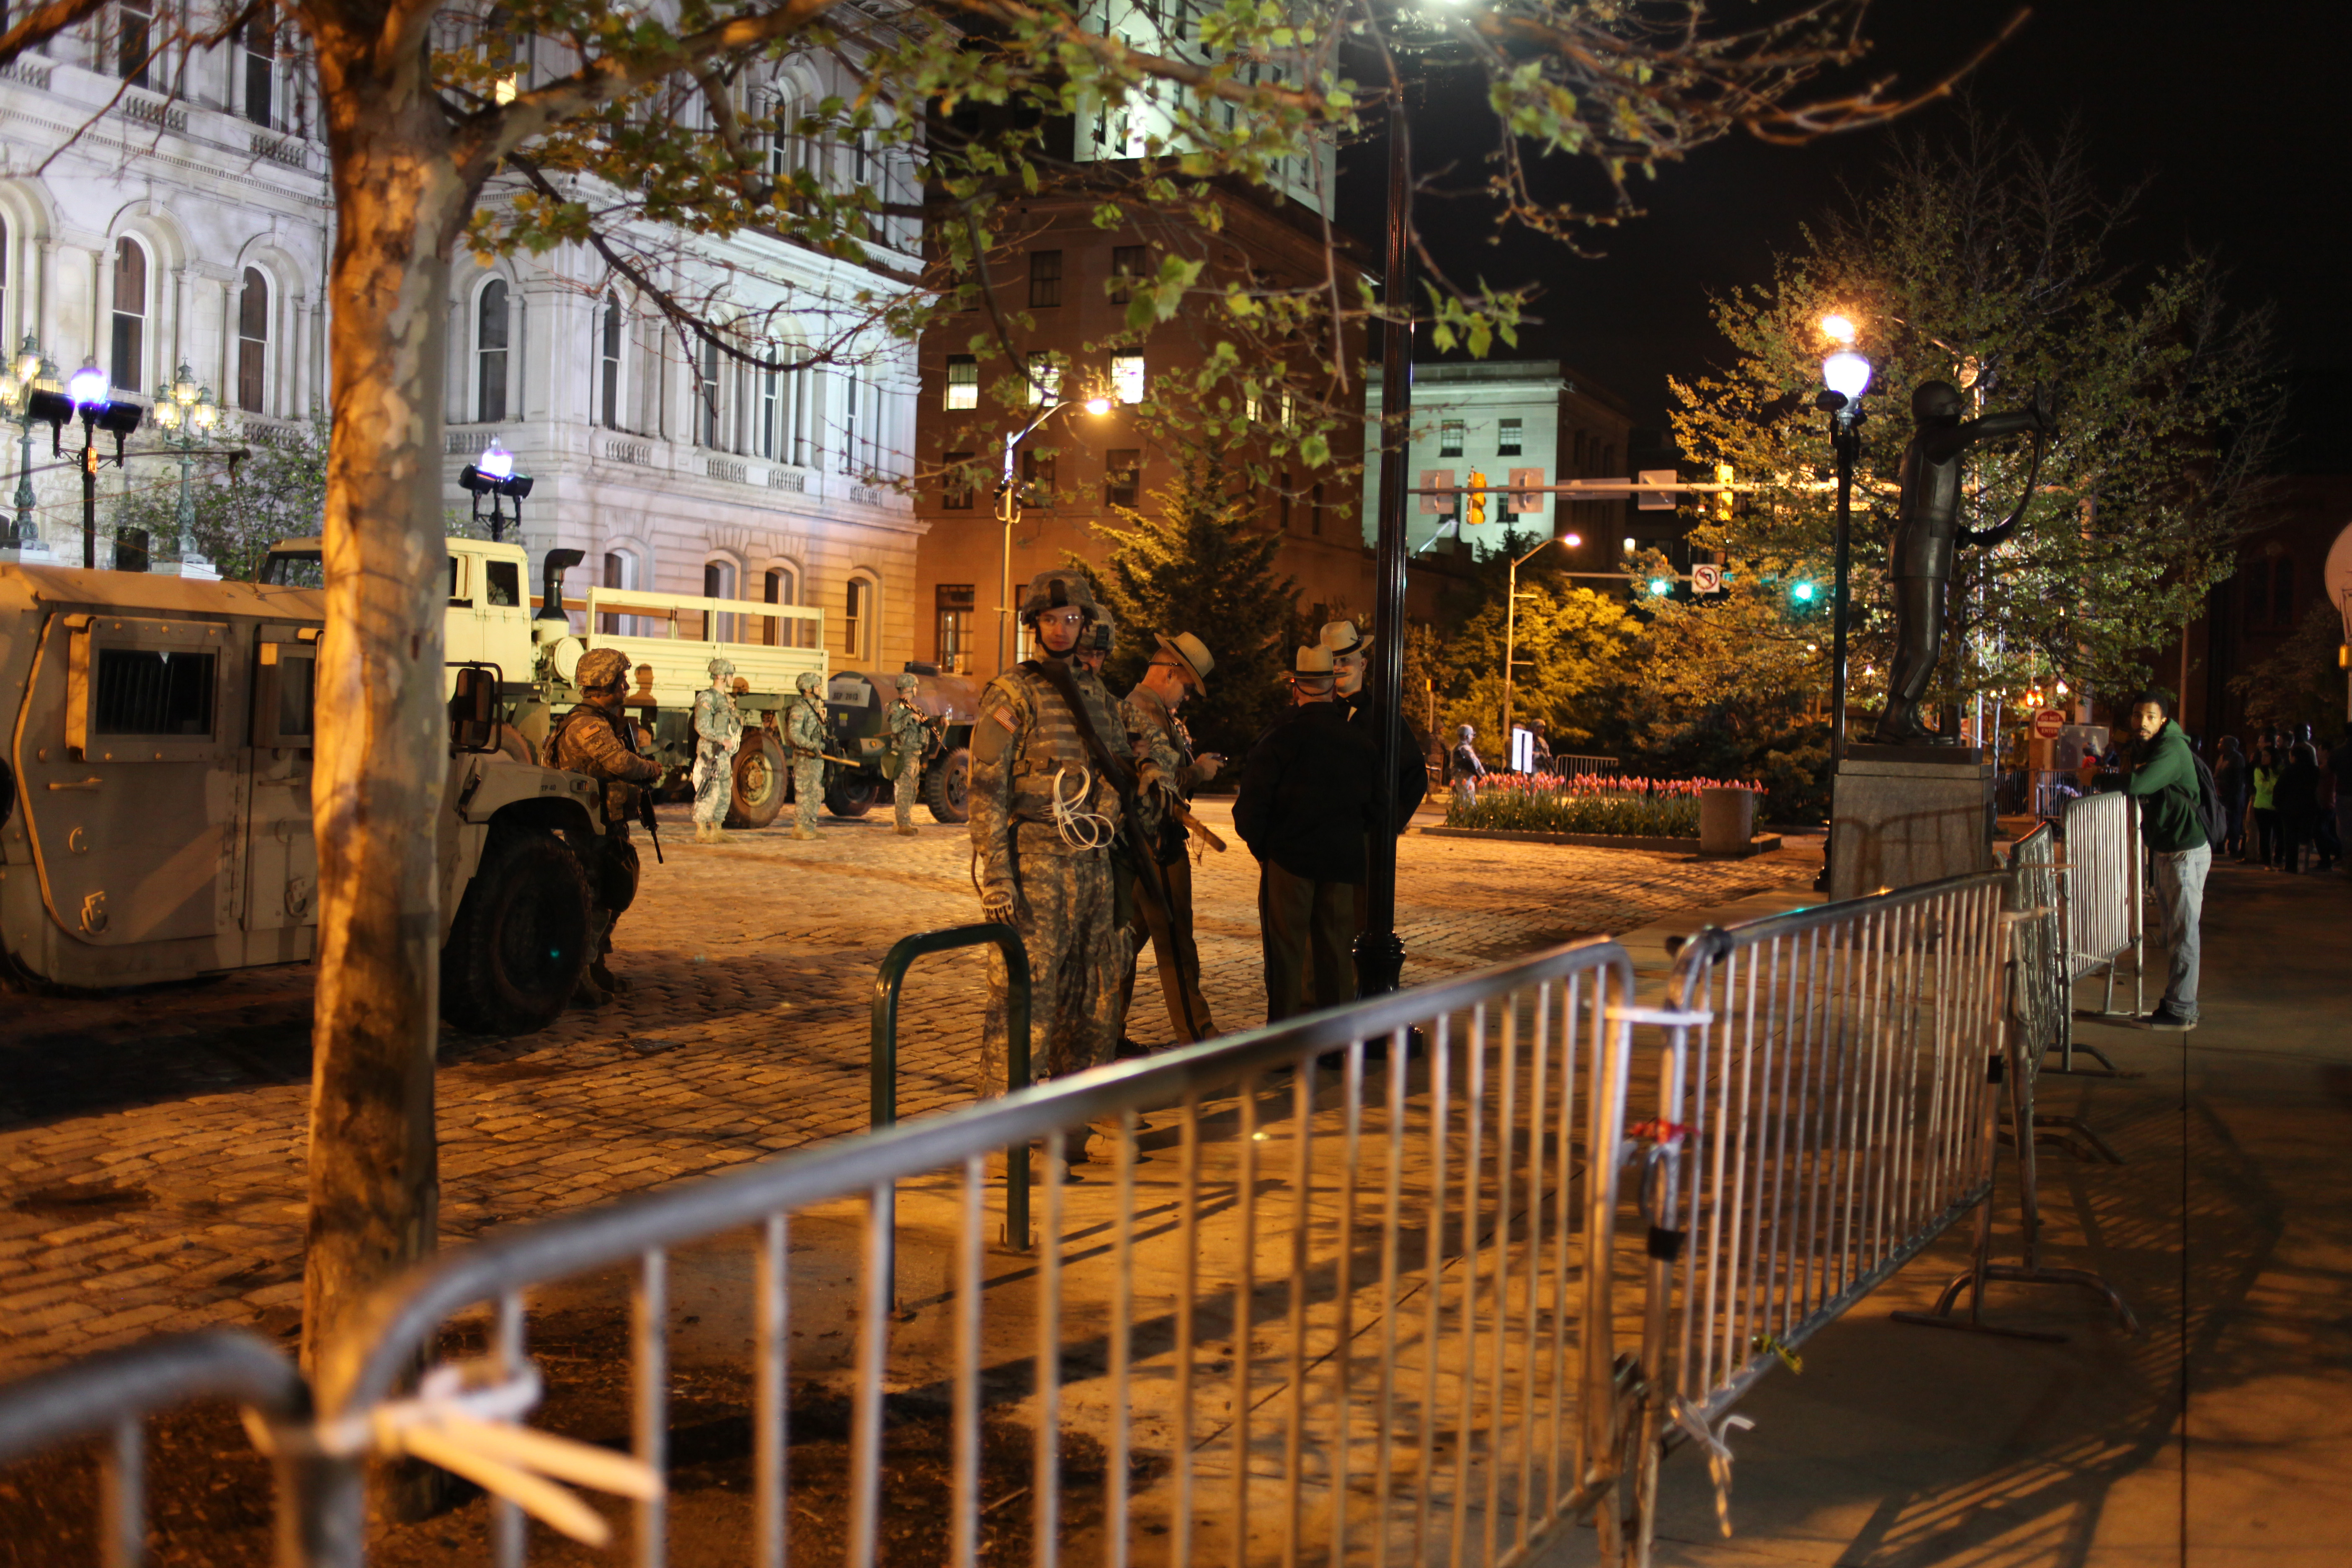 Maryland Army National Guard soldiers converse behind a barricade in front of Baltimore City Hall on April 30, 2015. (Jennifer-Leigh Oprihory/MEDILL NSJI)